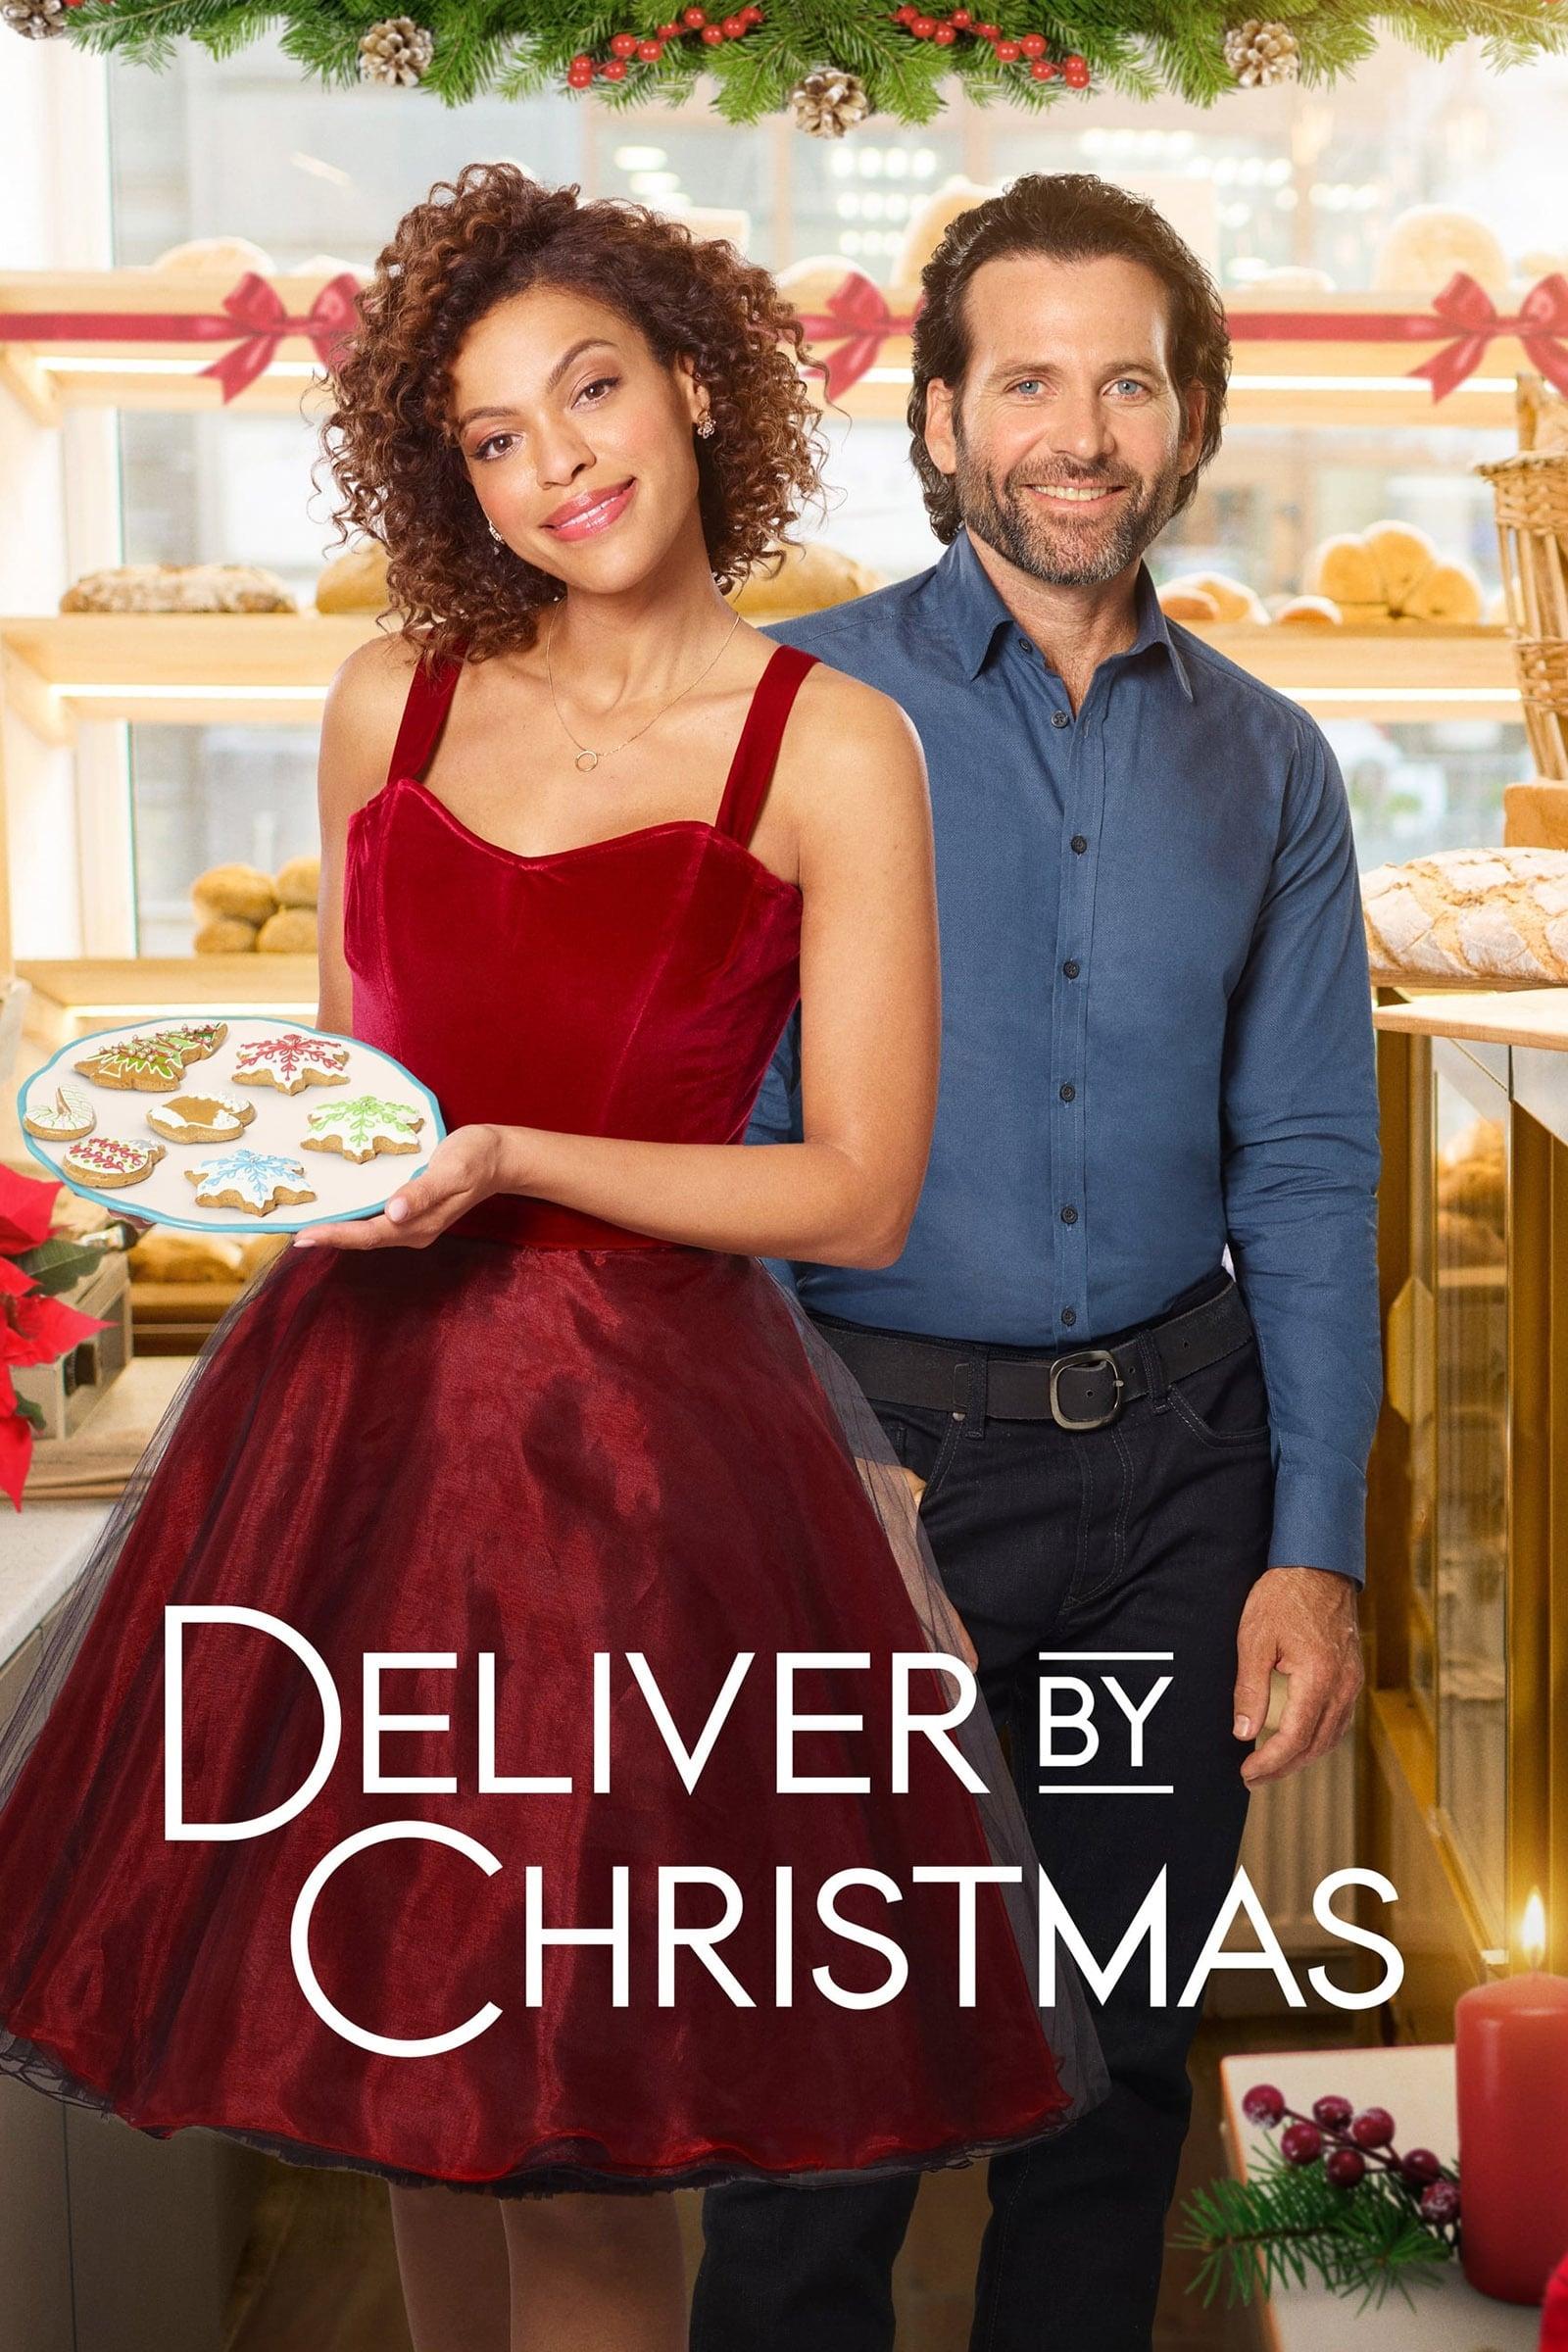 Deliver by Christmas poster